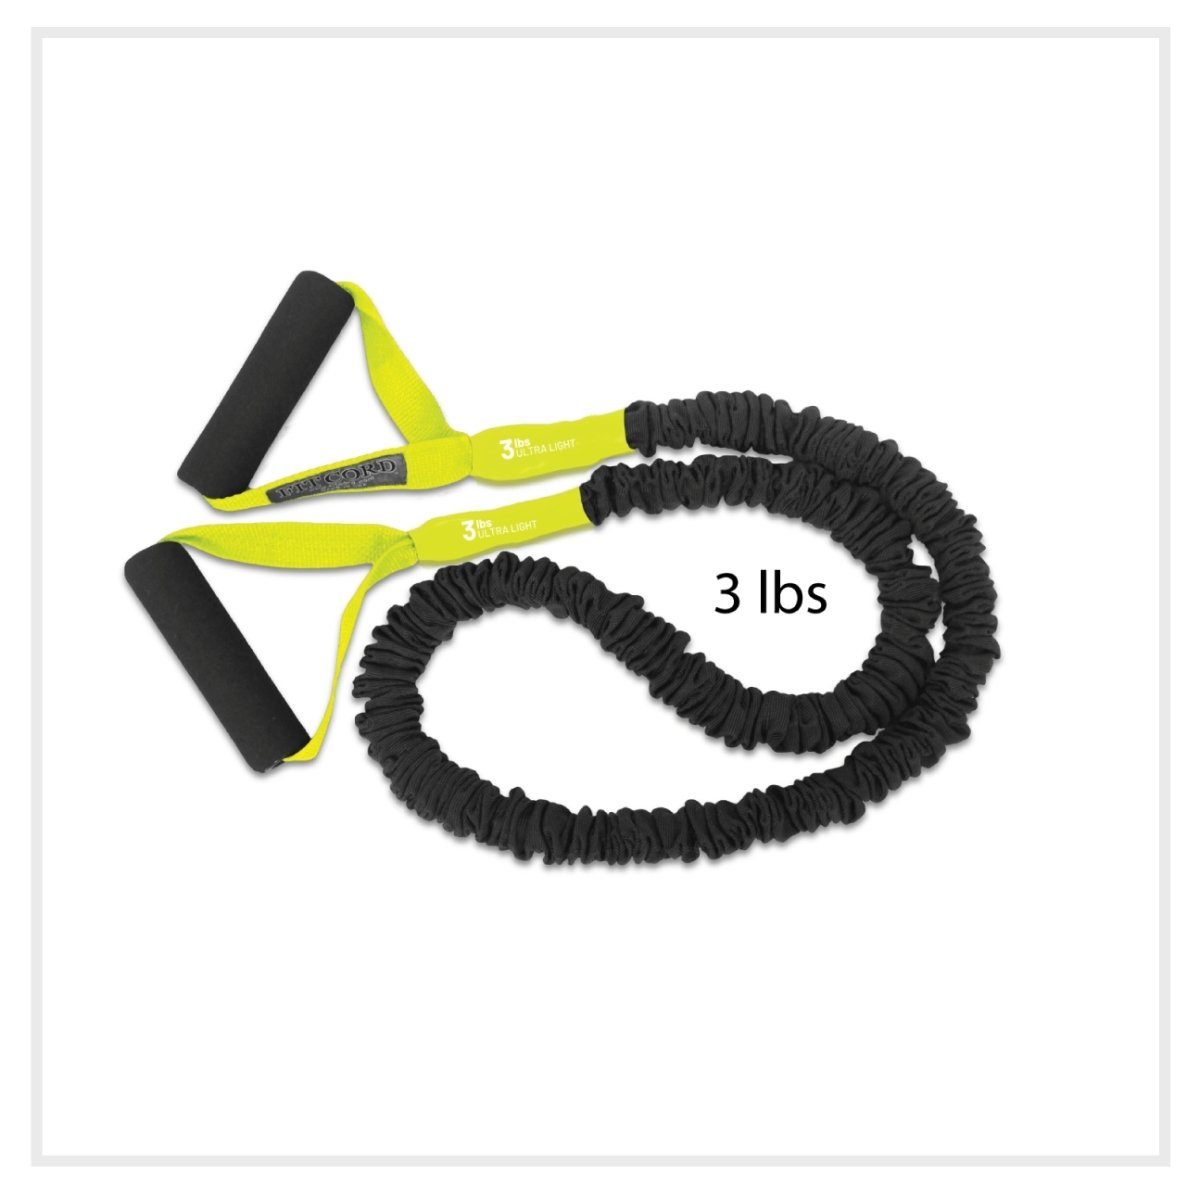 Best Resistance band on the market. America Made Covered exercise band with handles. Compare to stroops and you will find this cord is much better quality for the same price.